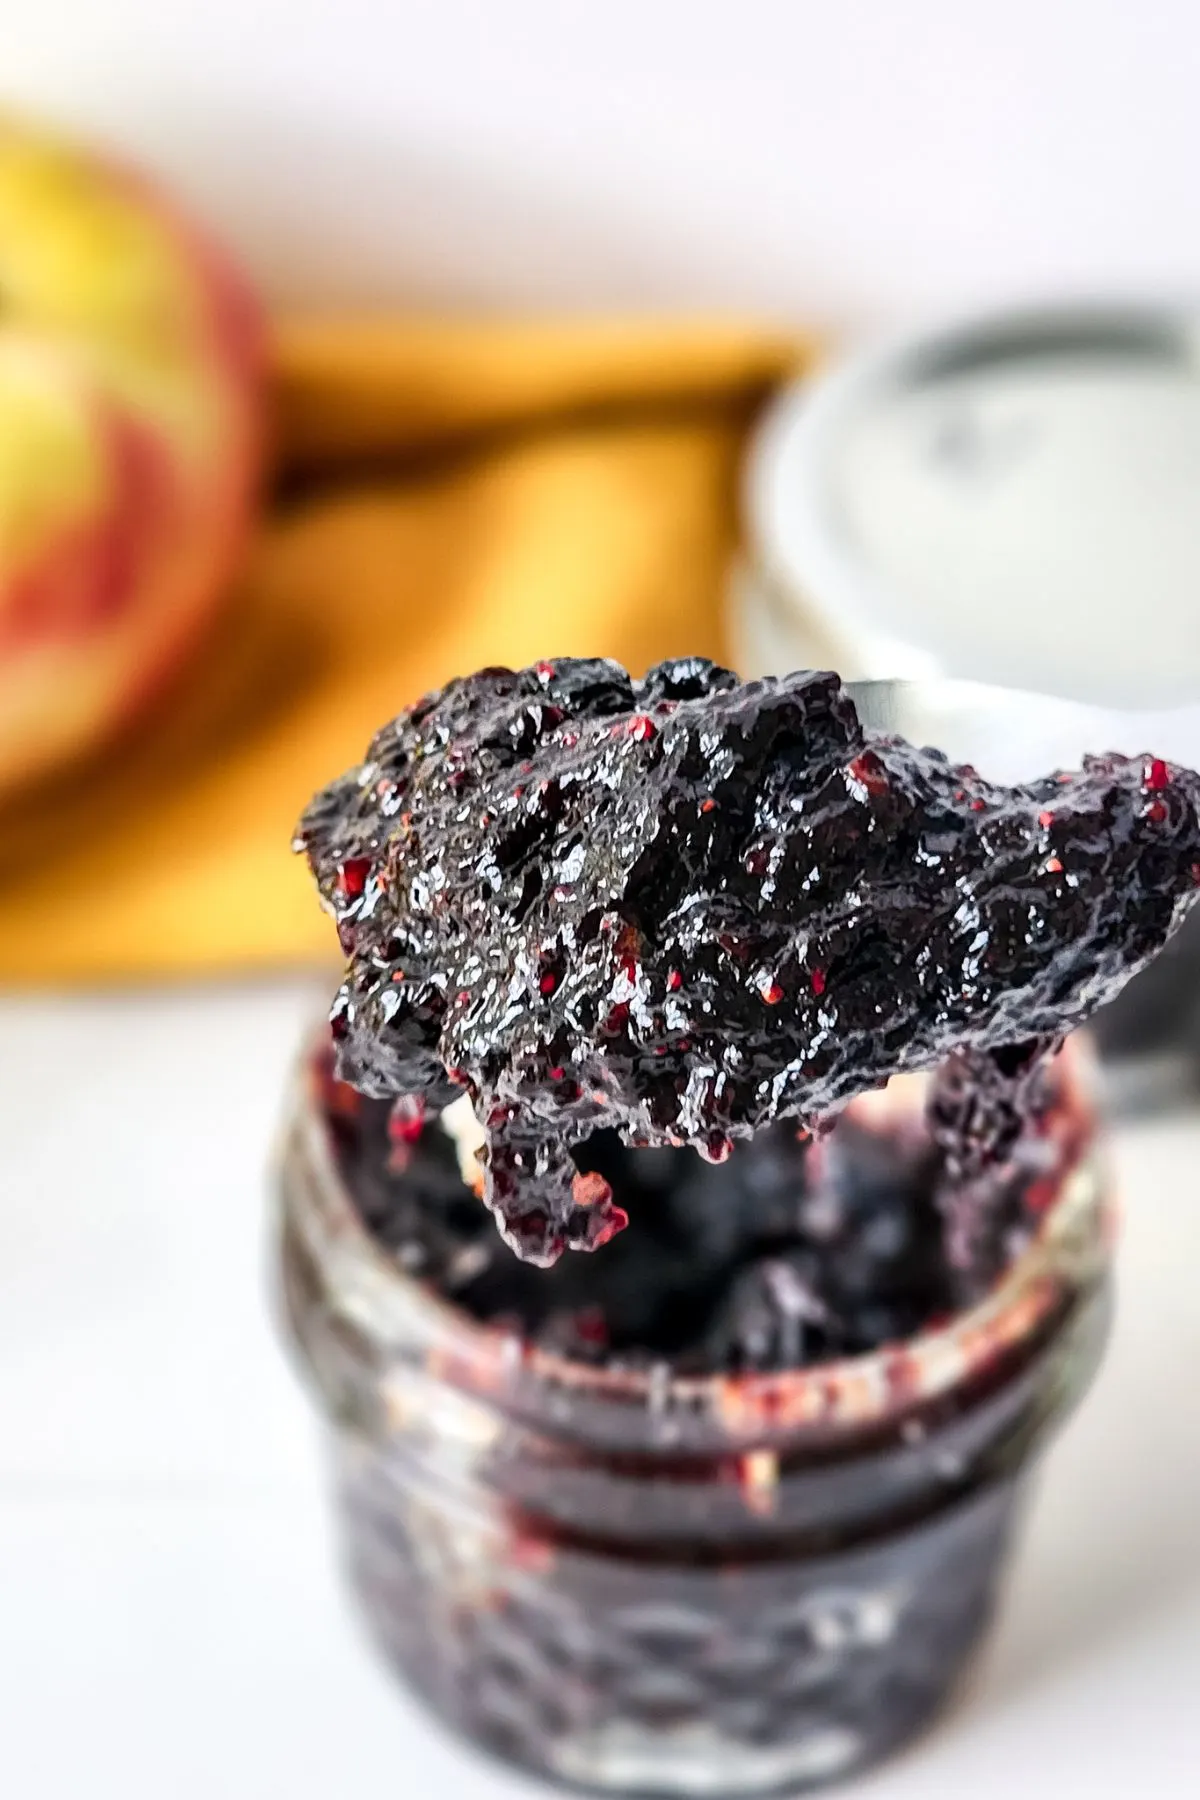 A spoon holding some mixed berry jam over the jar.